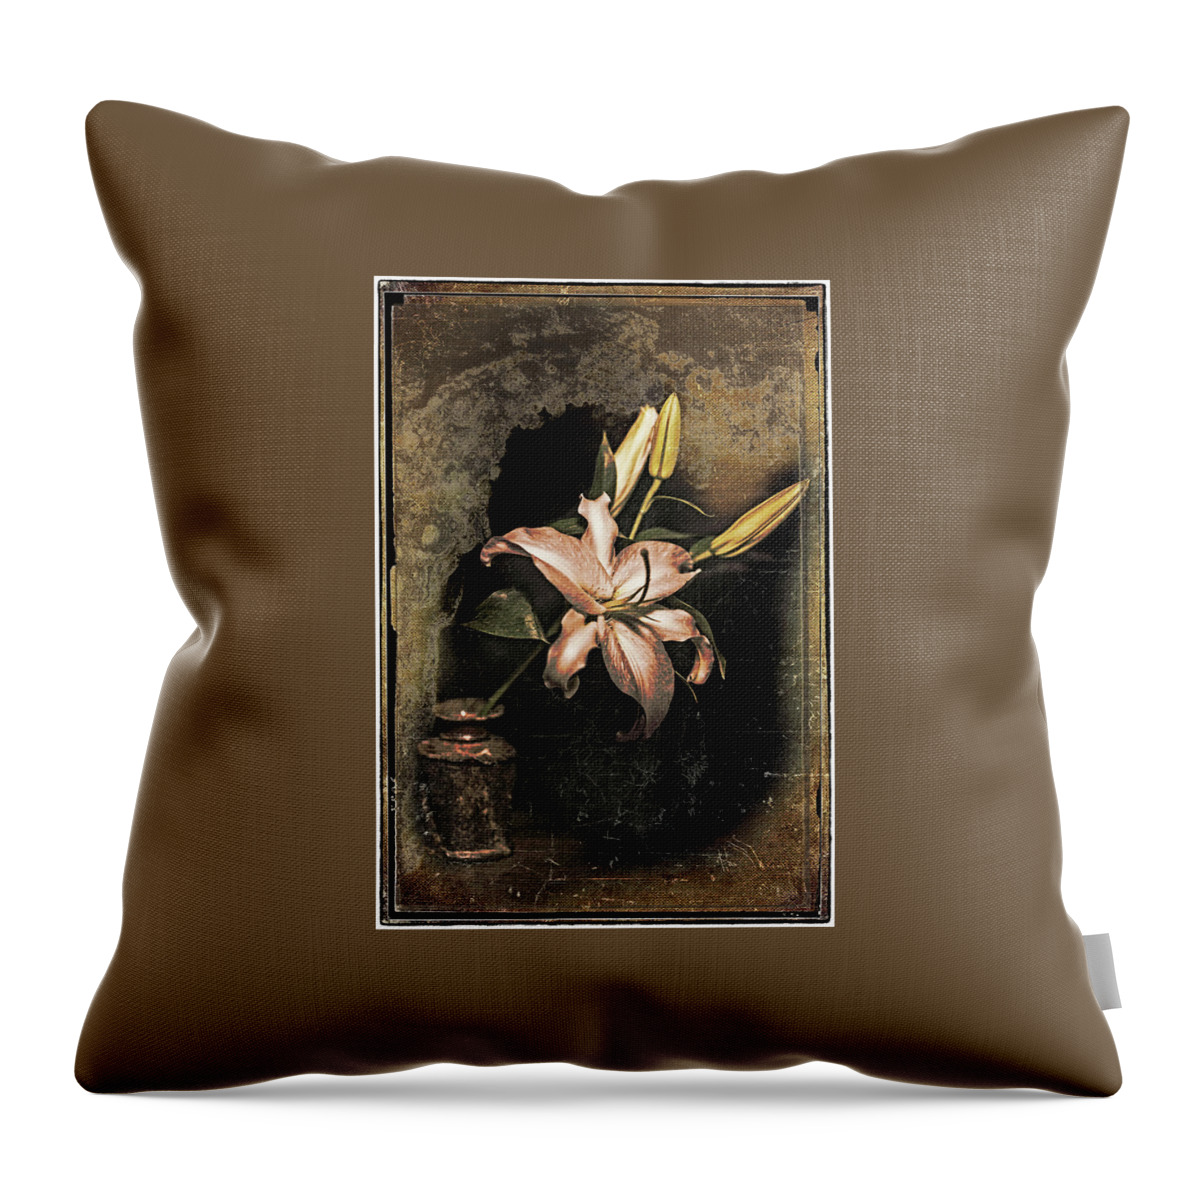  Throw Pillow featuring the photograph Lily by Bruce Bowers